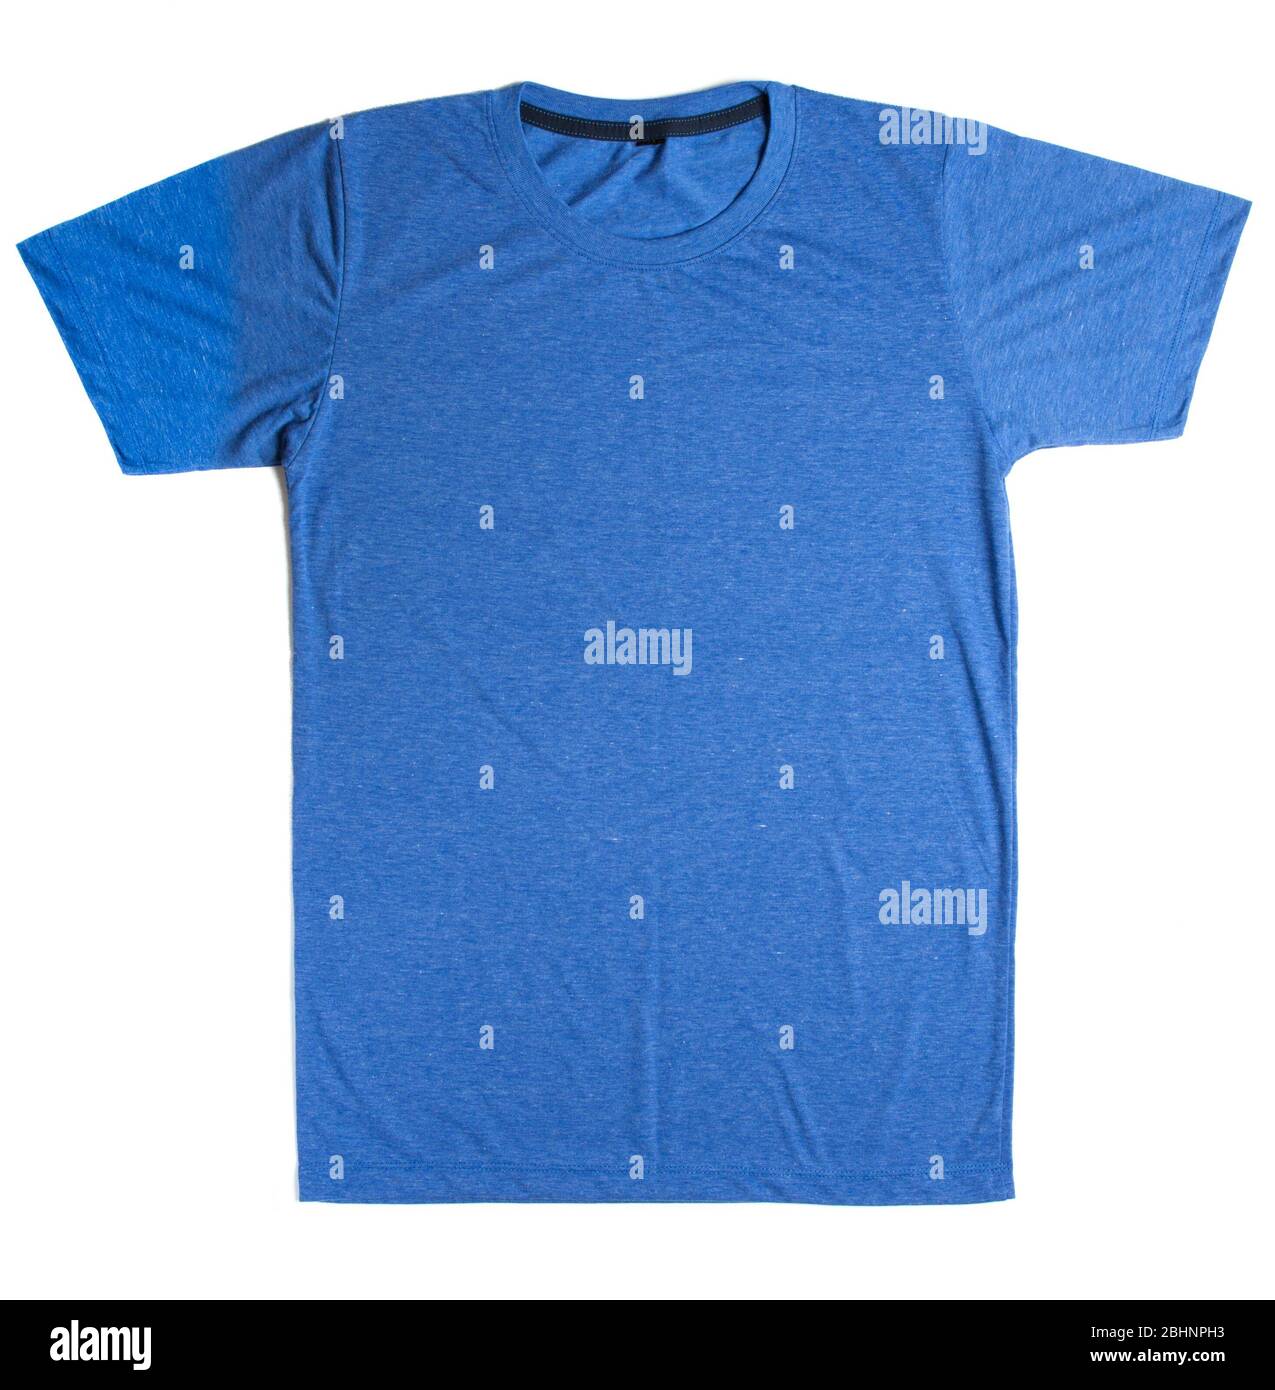 blue t-shirt template ready for your own graphics Stock Photo - Alamy